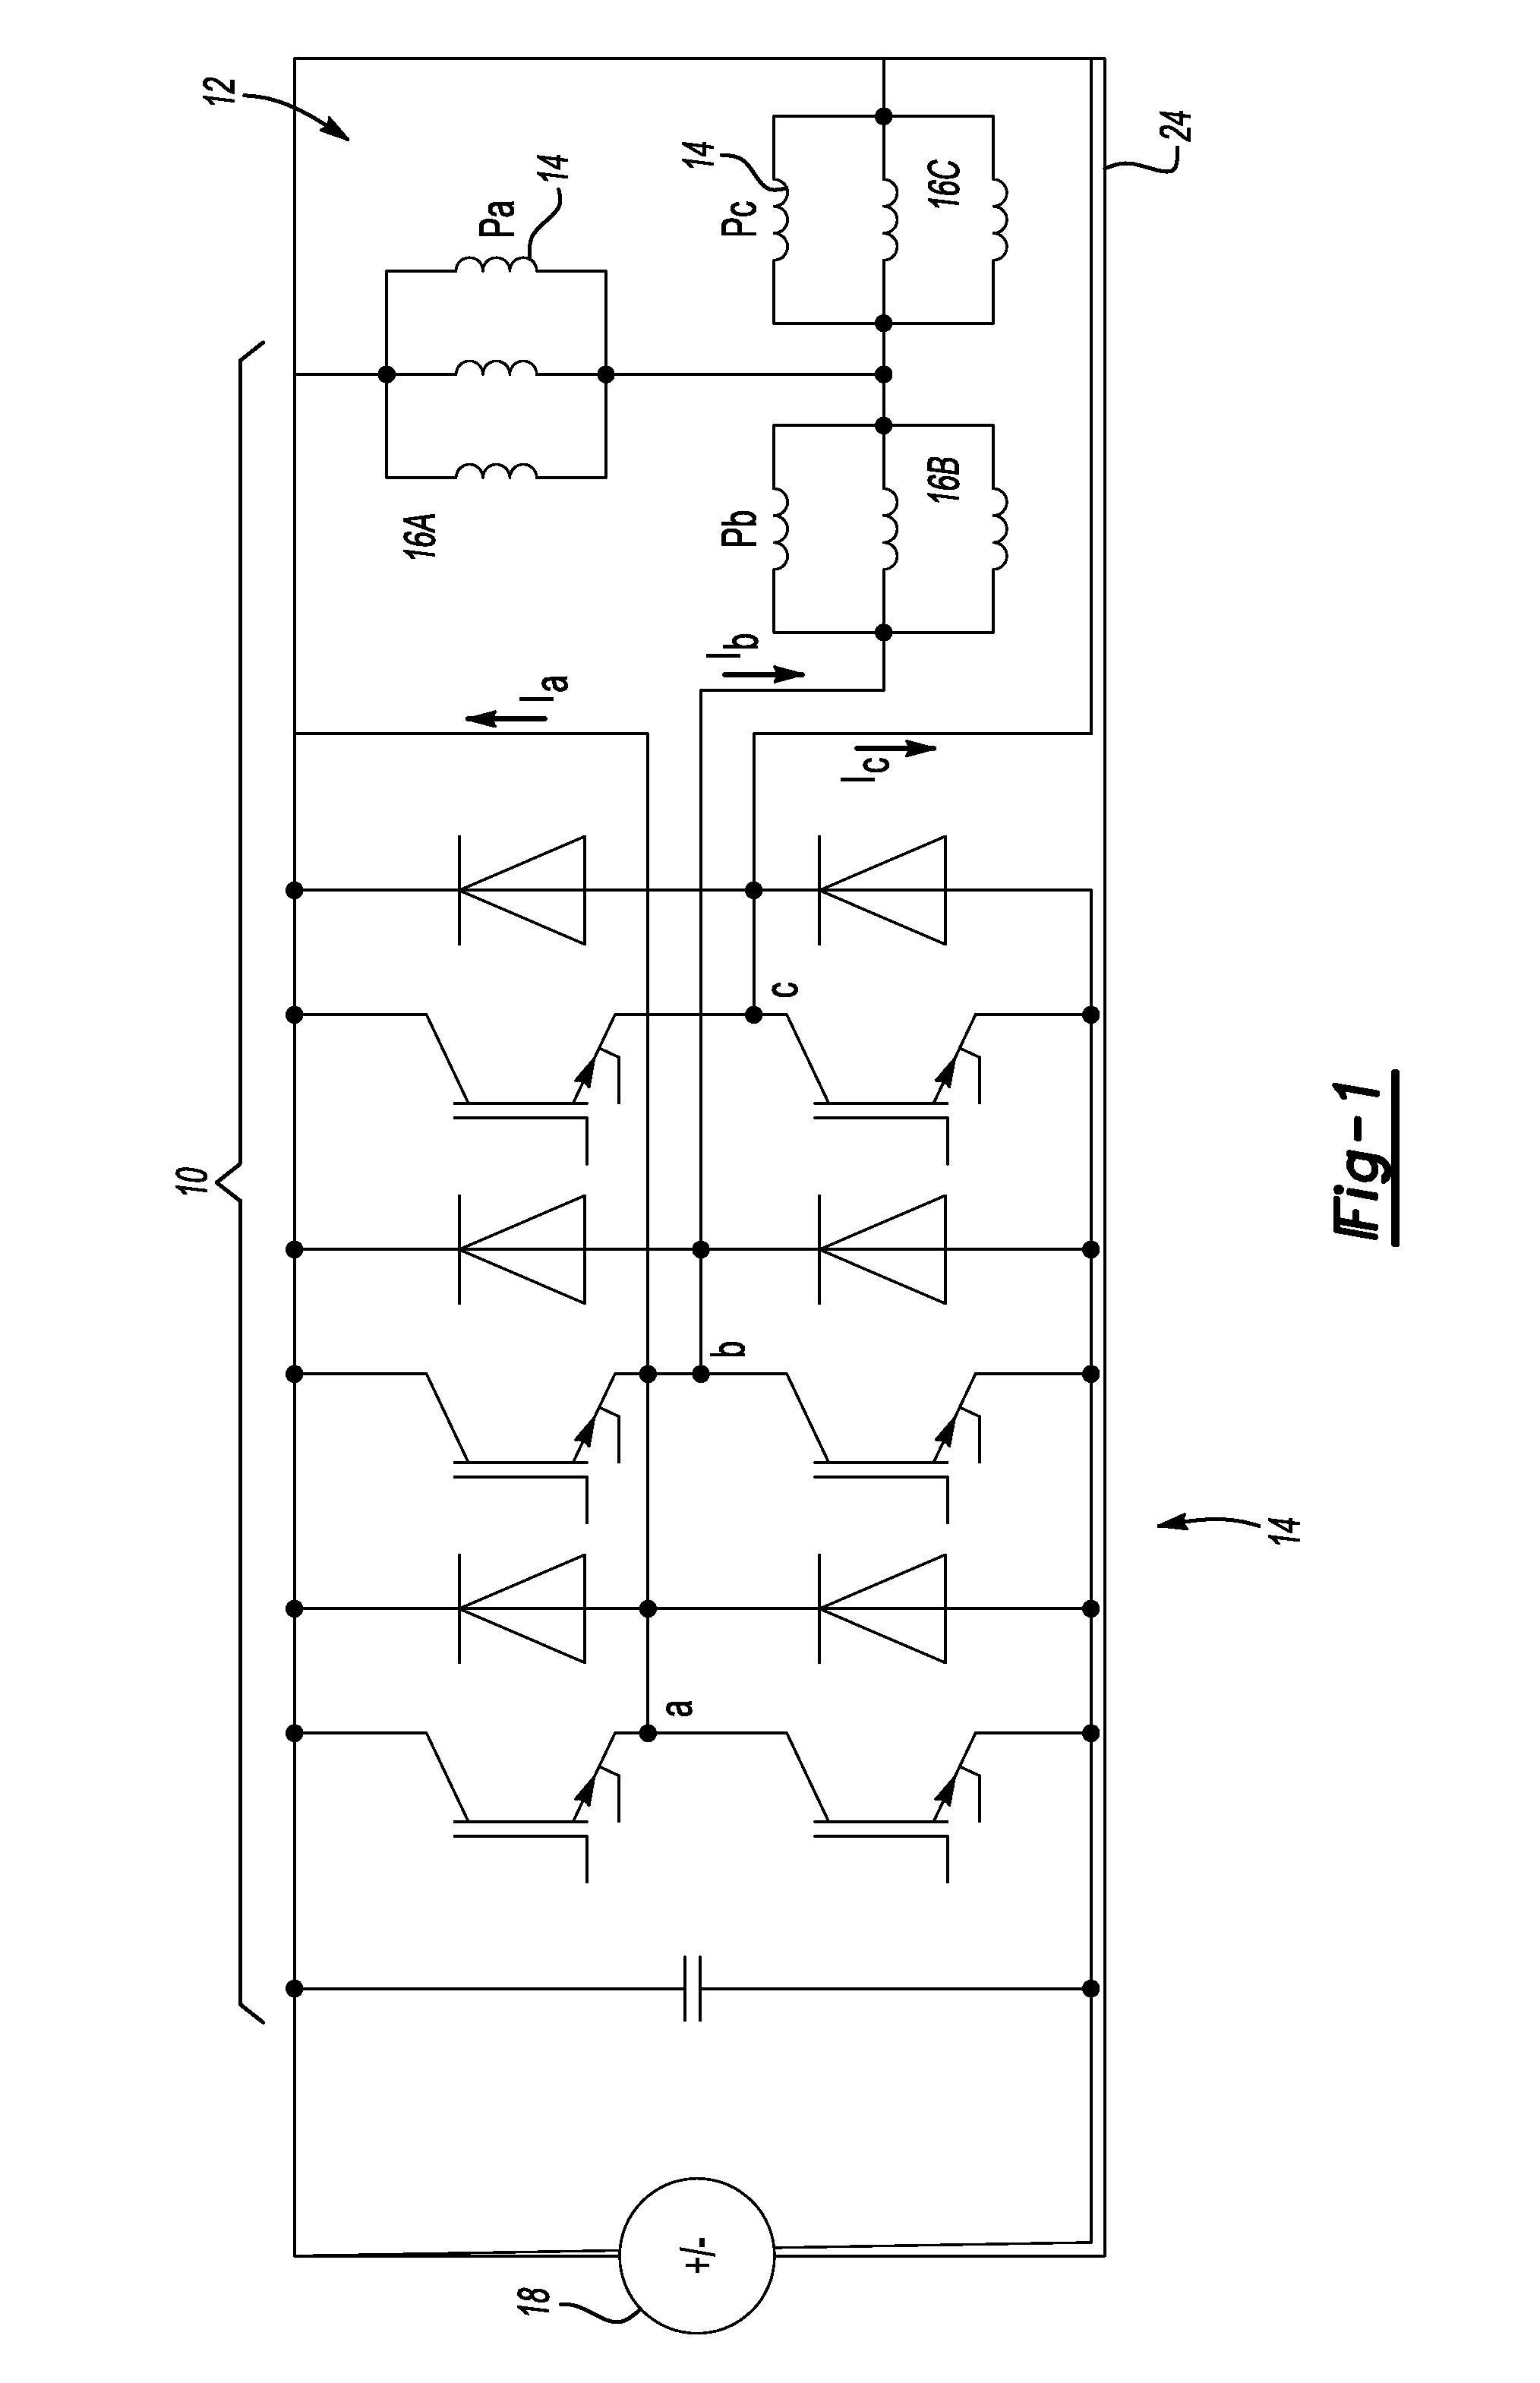 Motor phase winding fault detection method and apparatus